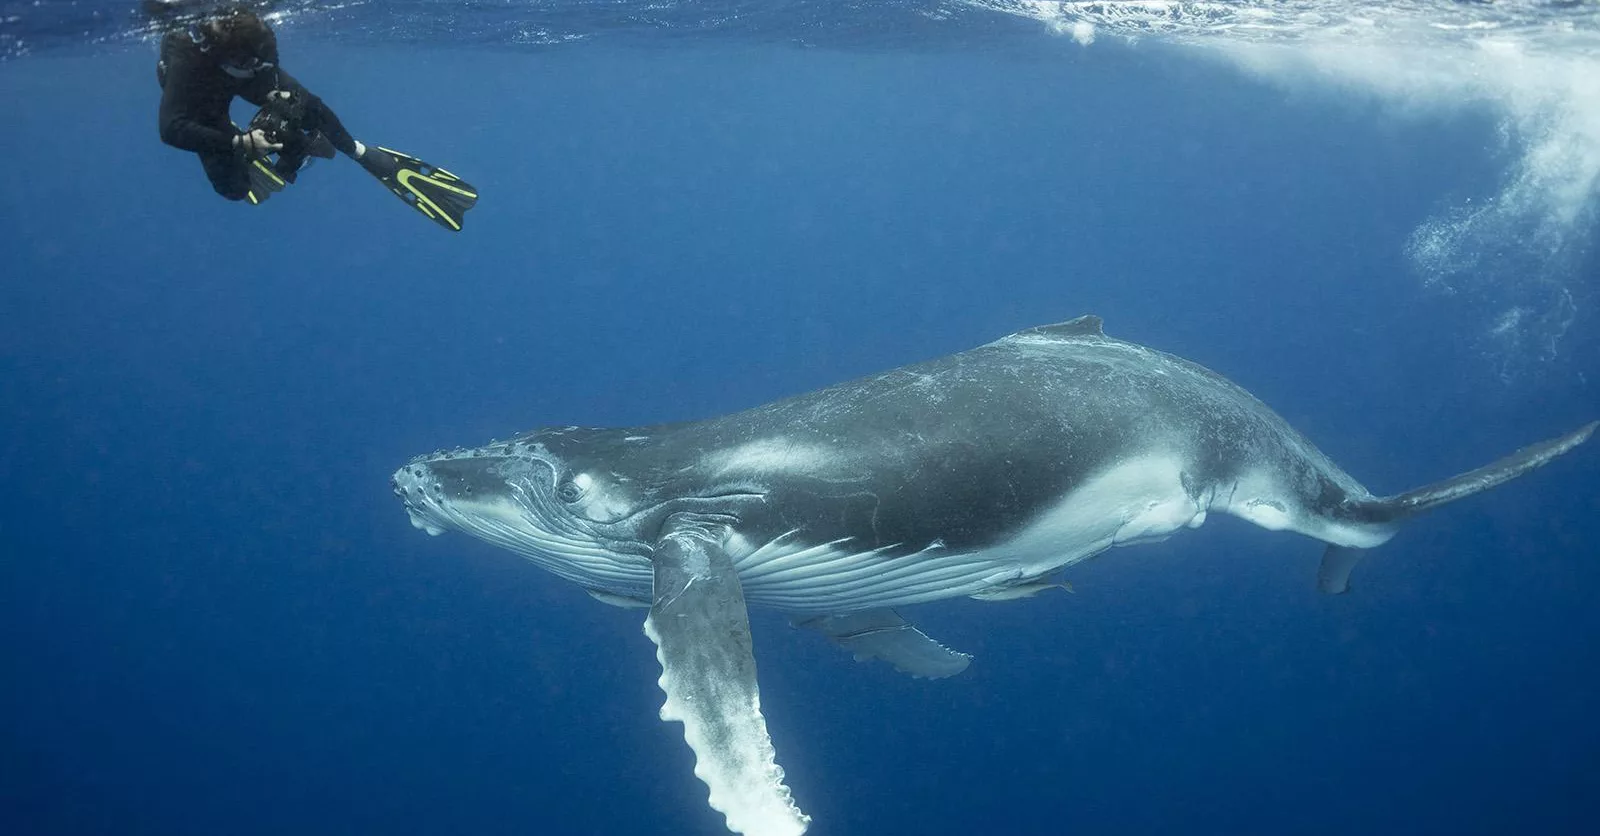 Scuba diver and majestic humpback whale swimming underwater in the ocean